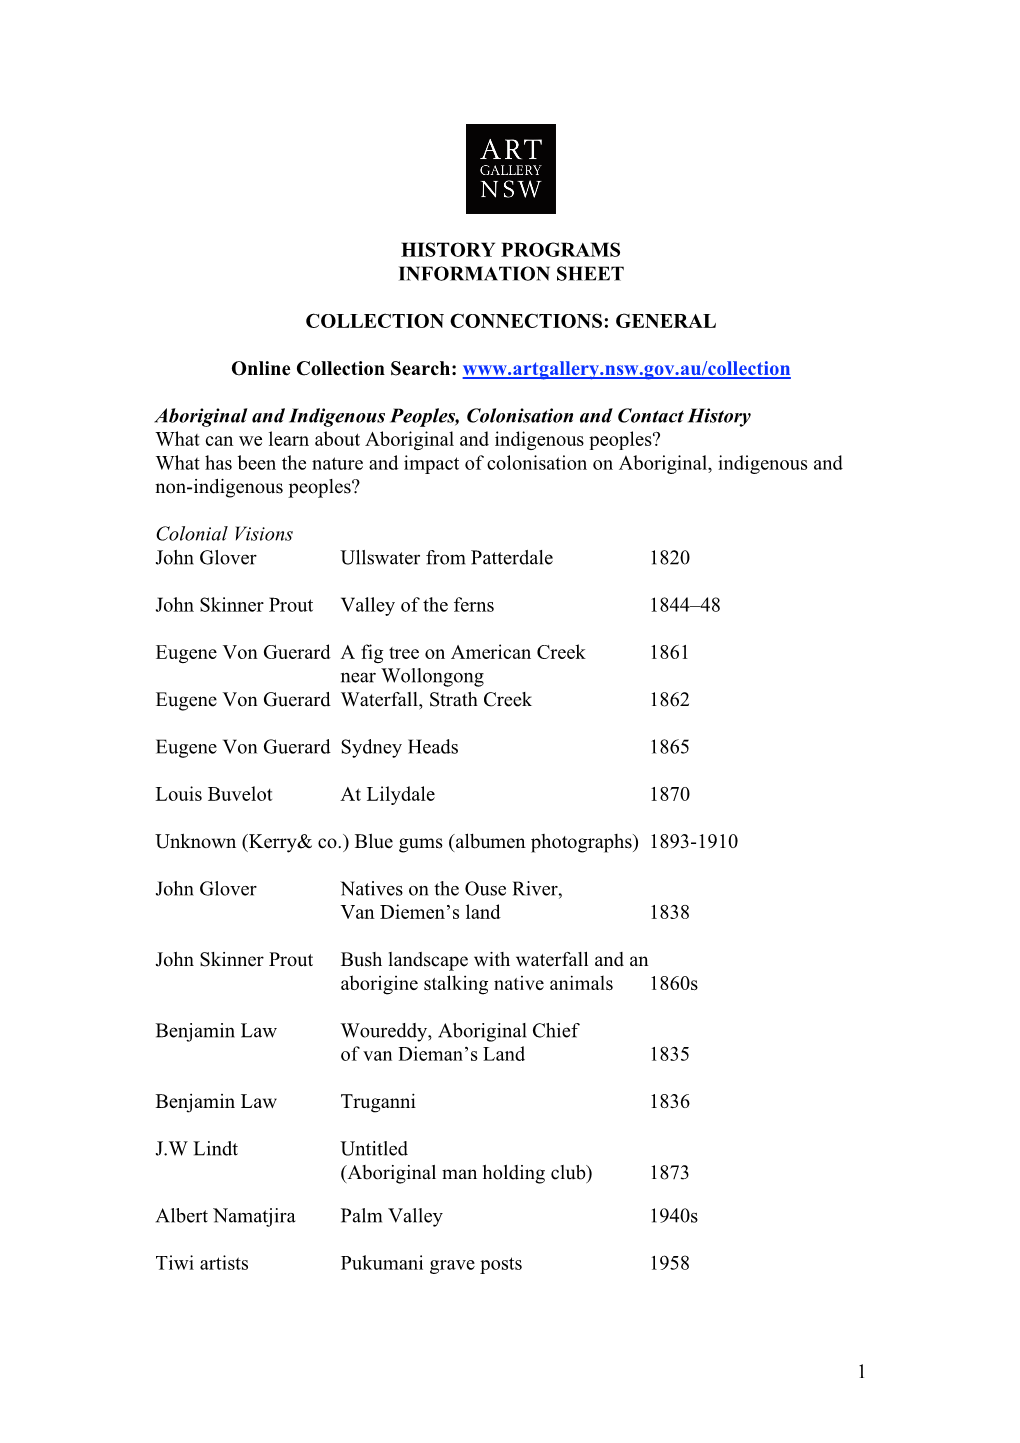 1 History Programs Information Sheet Collection